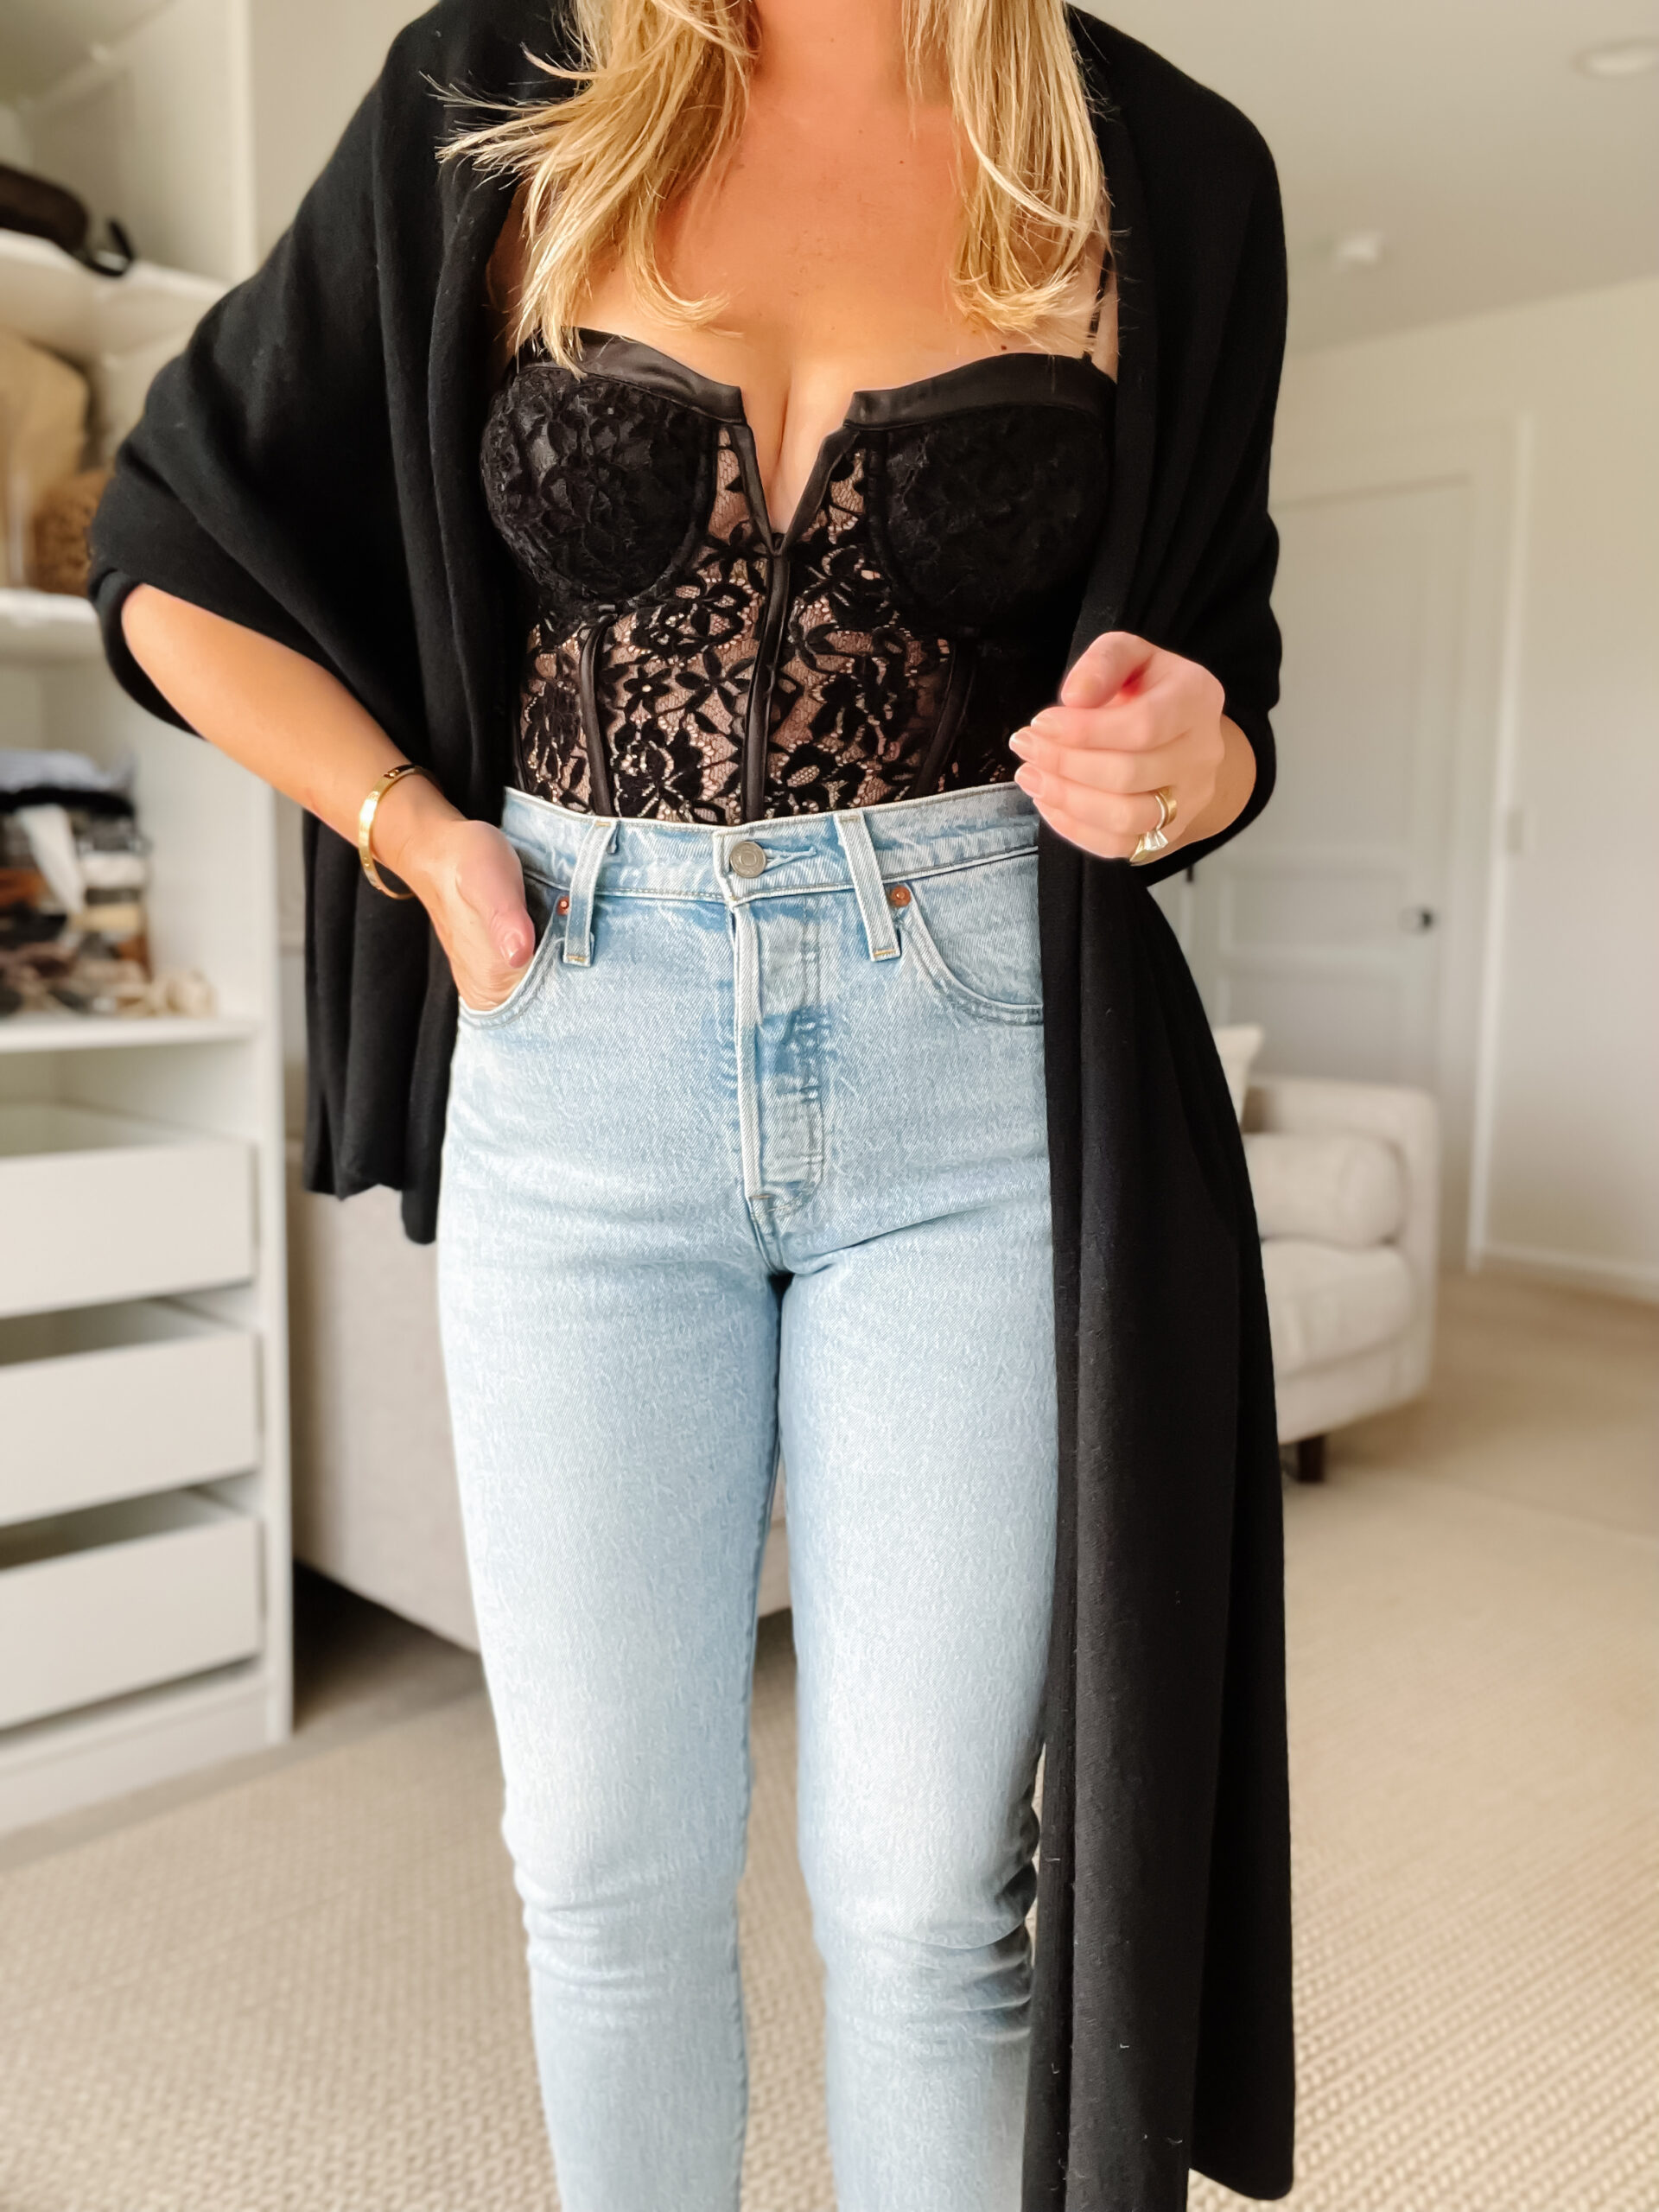 Lace Bodysuit Outfit Inspiration